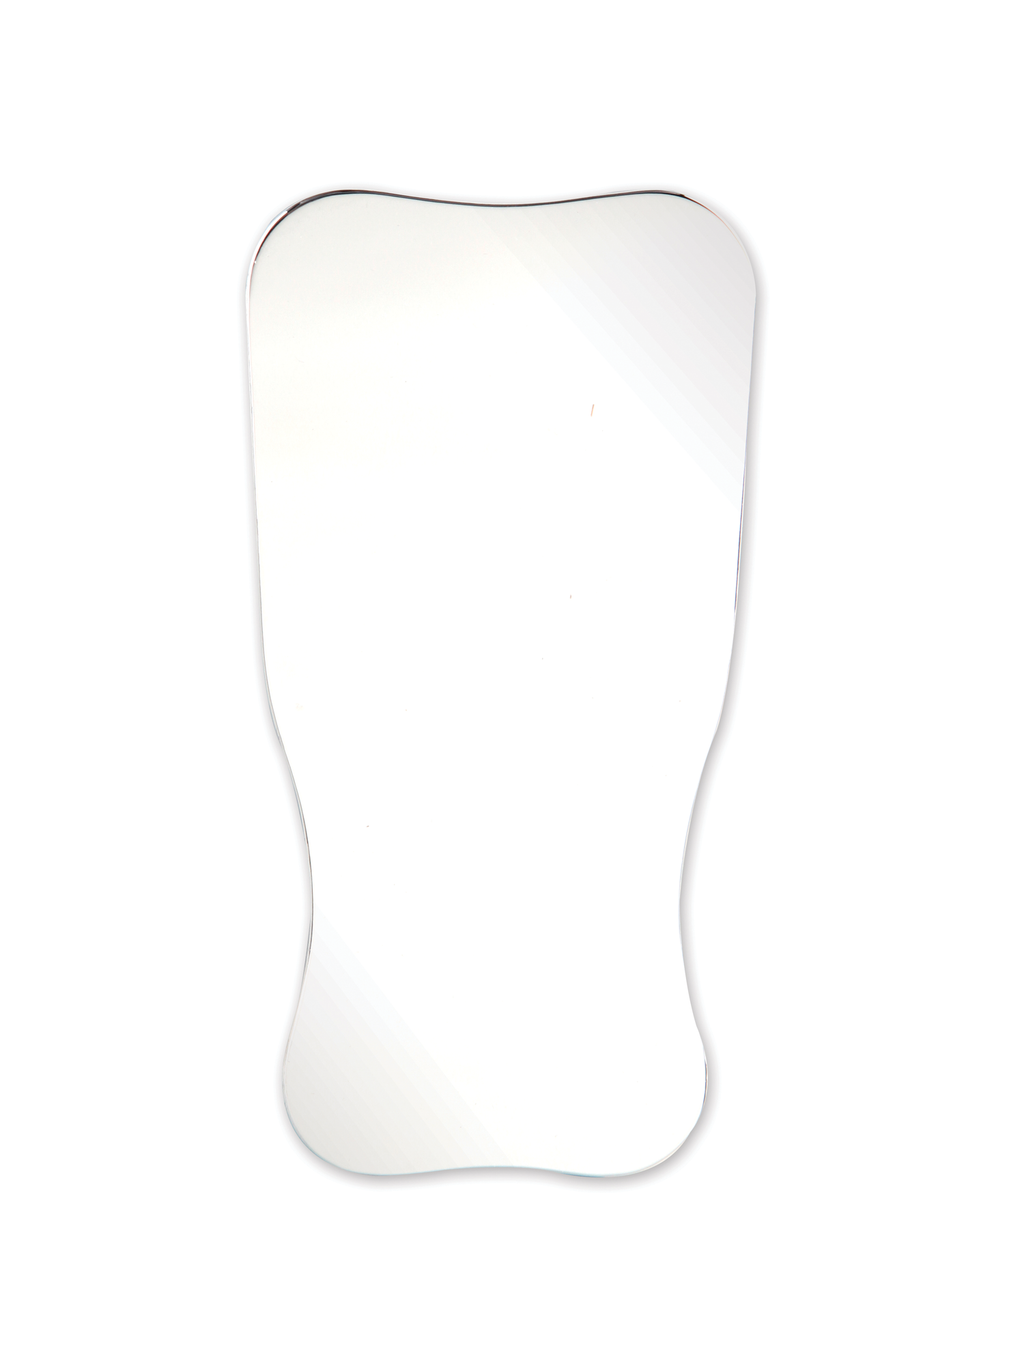 Two-Sided Occlusal Intraoral Mirror (XL Adult)